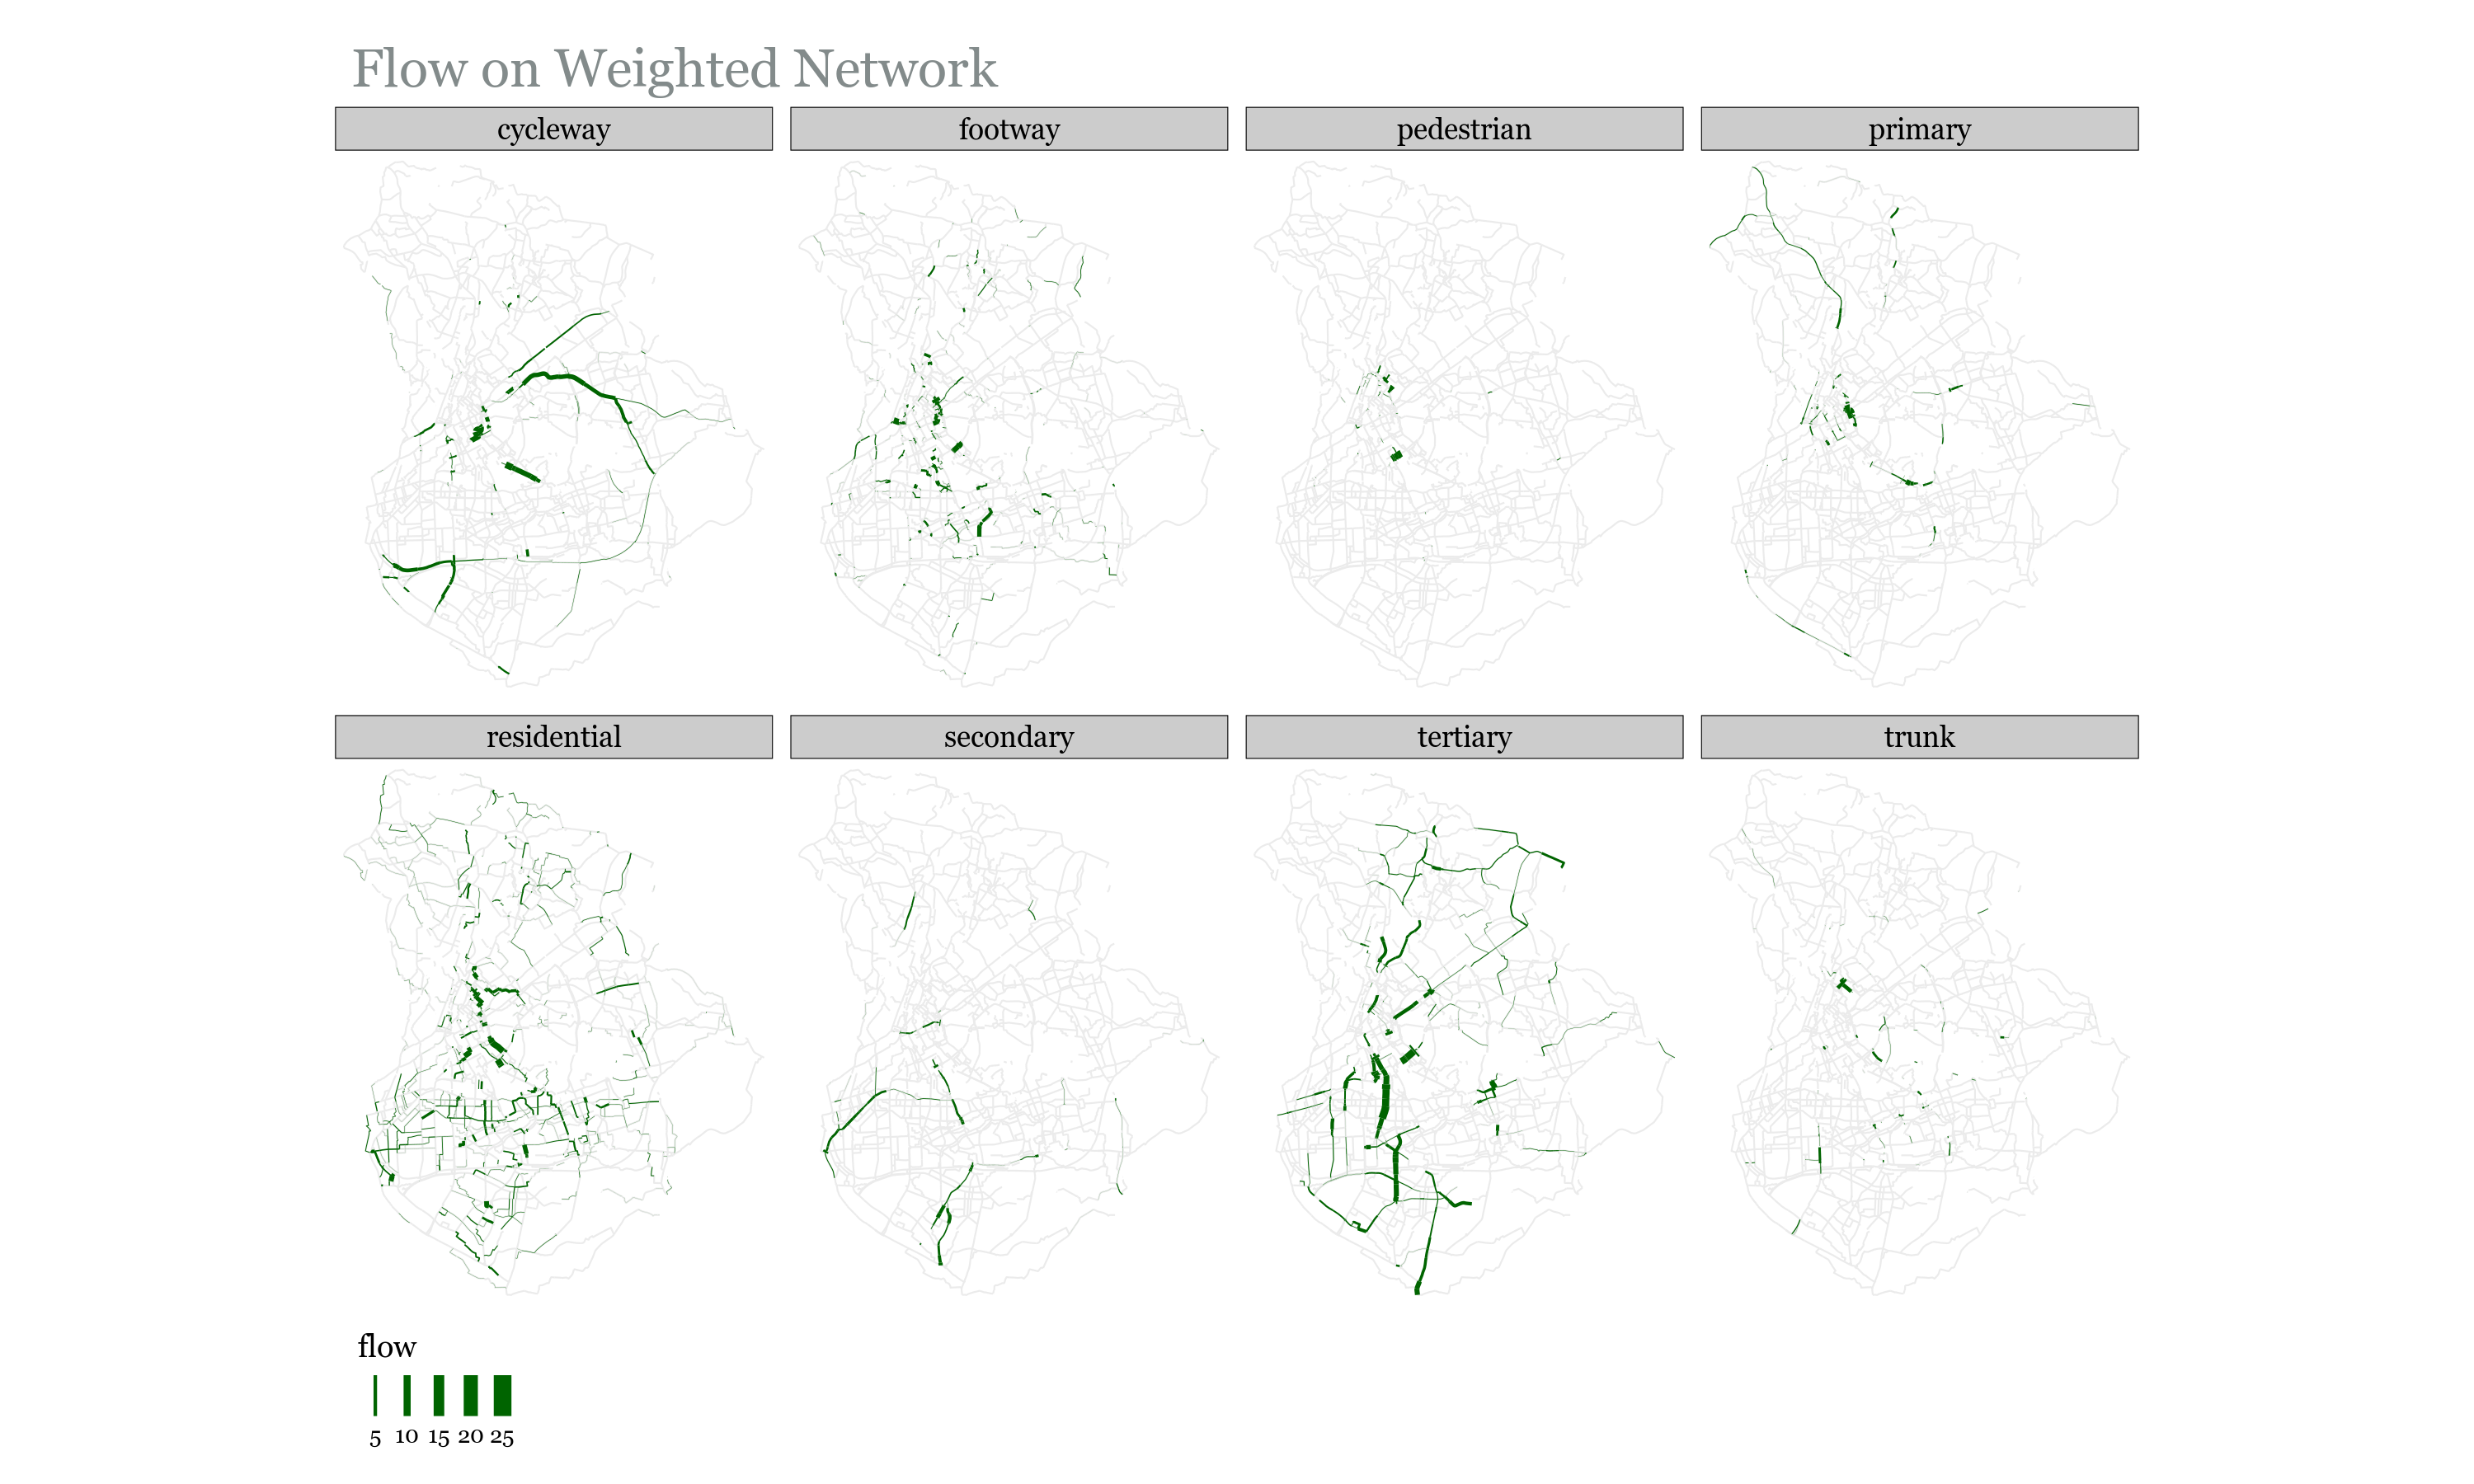 Flow results based on weighted shortest paths (Manchester)